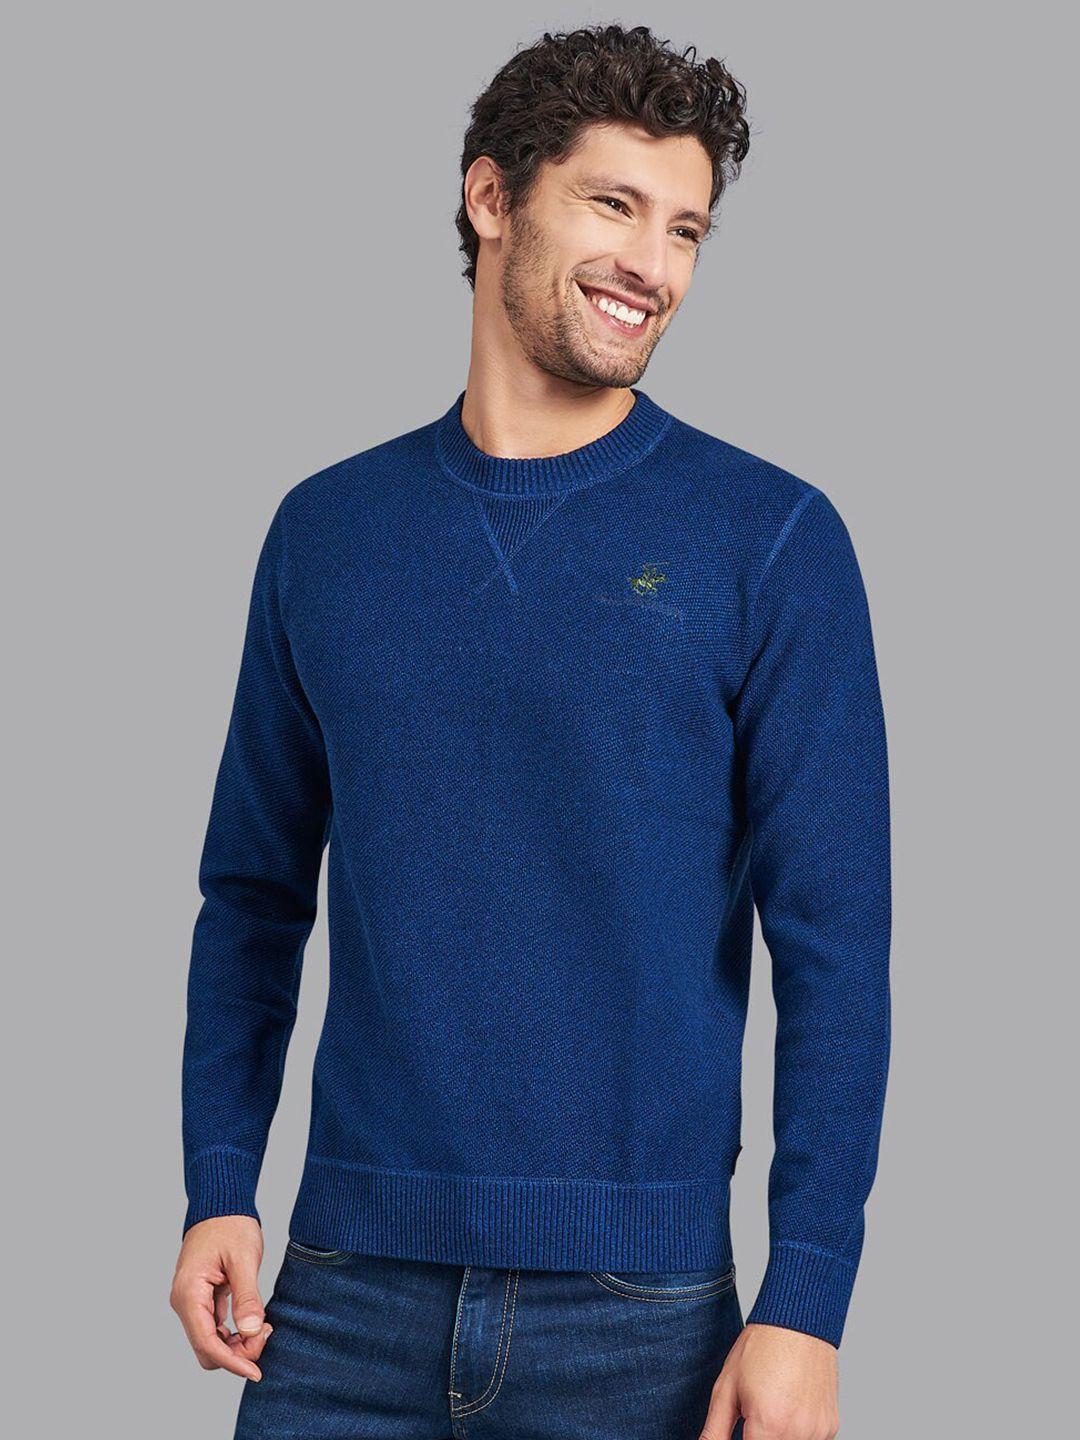 Beverly Hills Polo Club Men Navy Blue Cotton Pullover